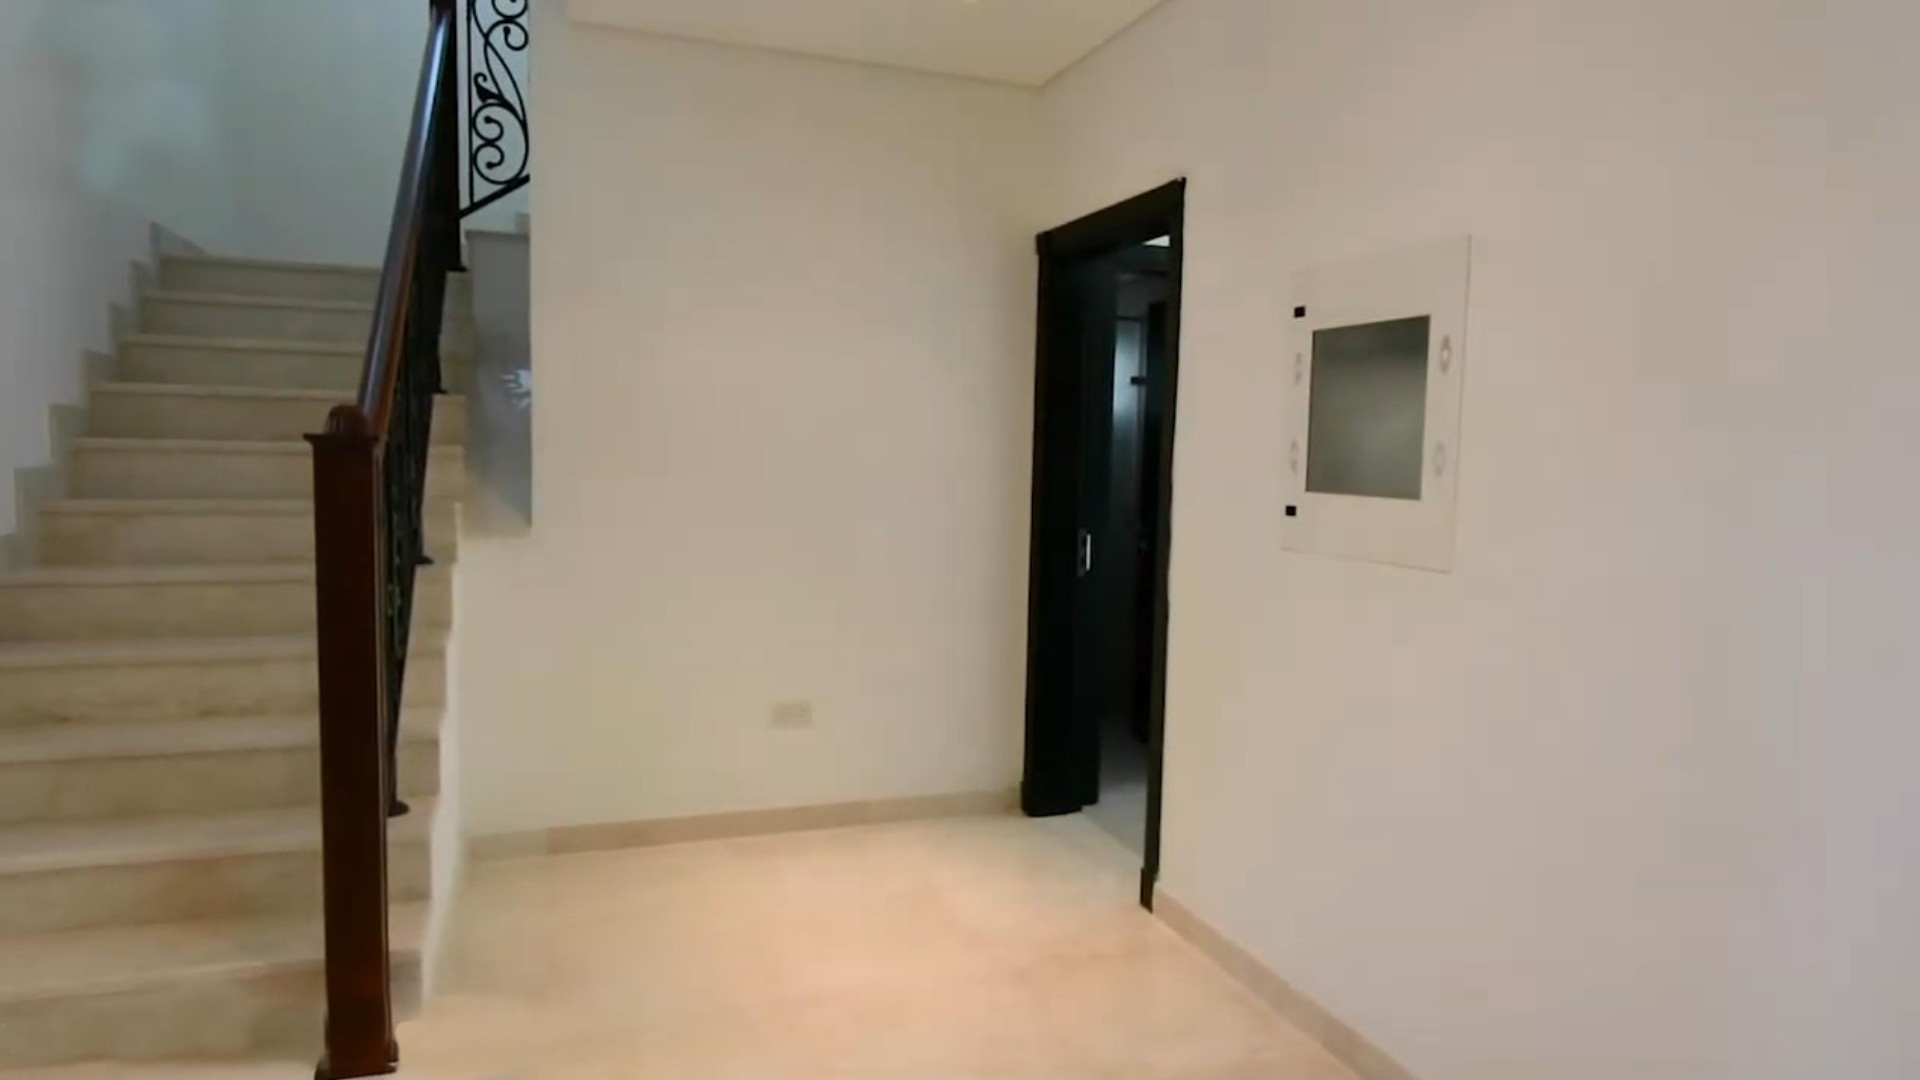 Townhouse for sale in Dubai, UAE, 3 bedrooms, 223 m², No. 24884 – photo 4